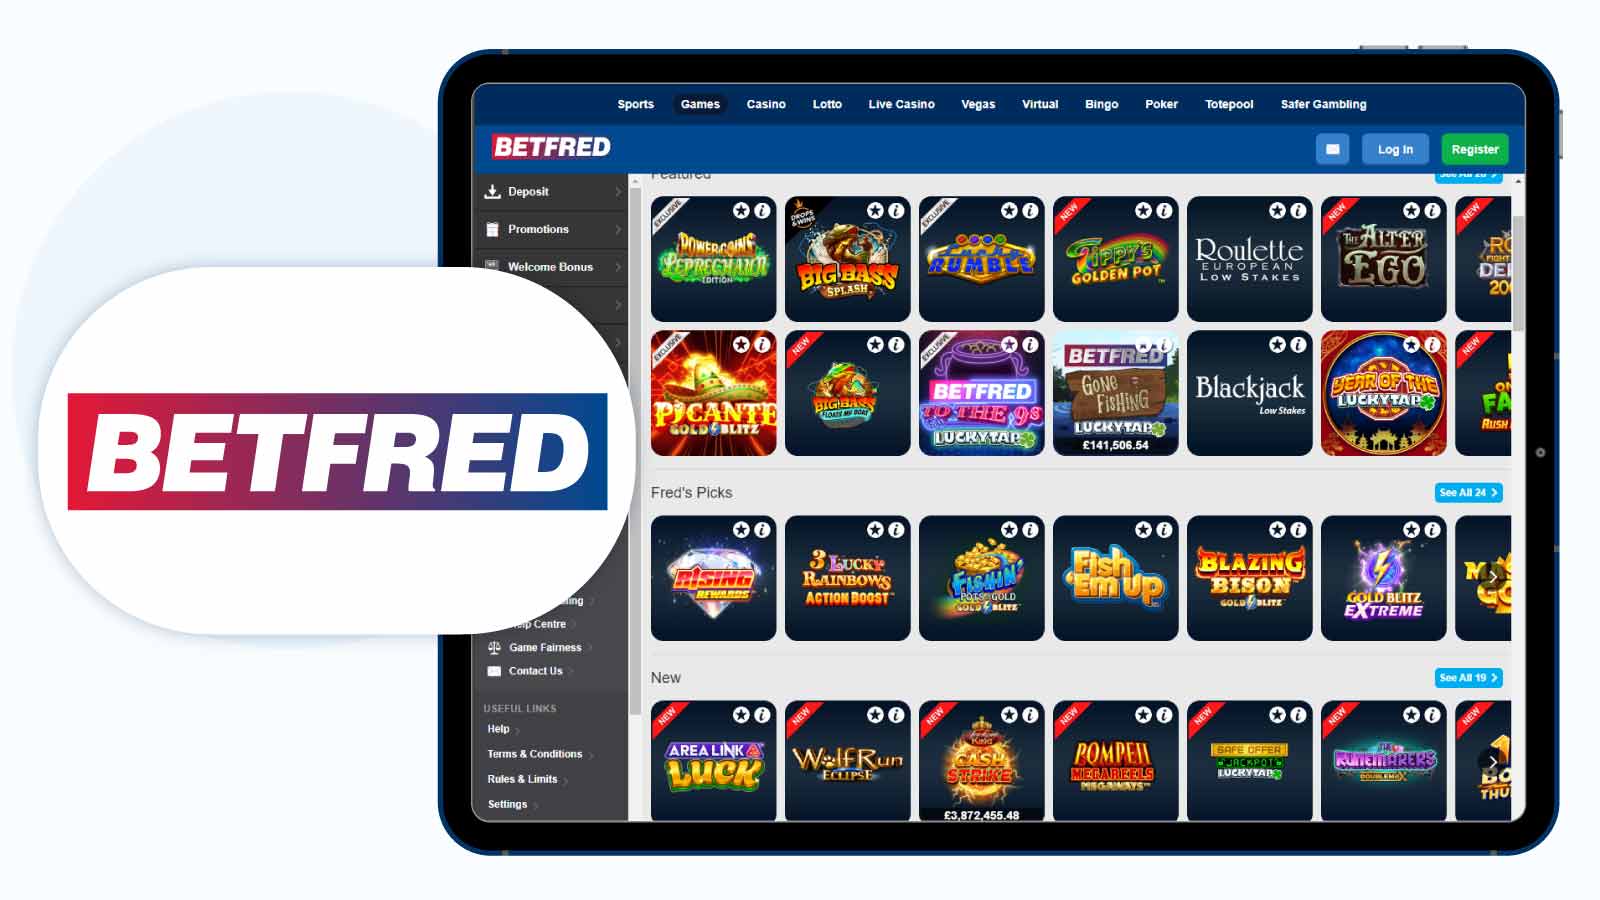 Betfred Casino – Bank Transfer Casino with No Wagering